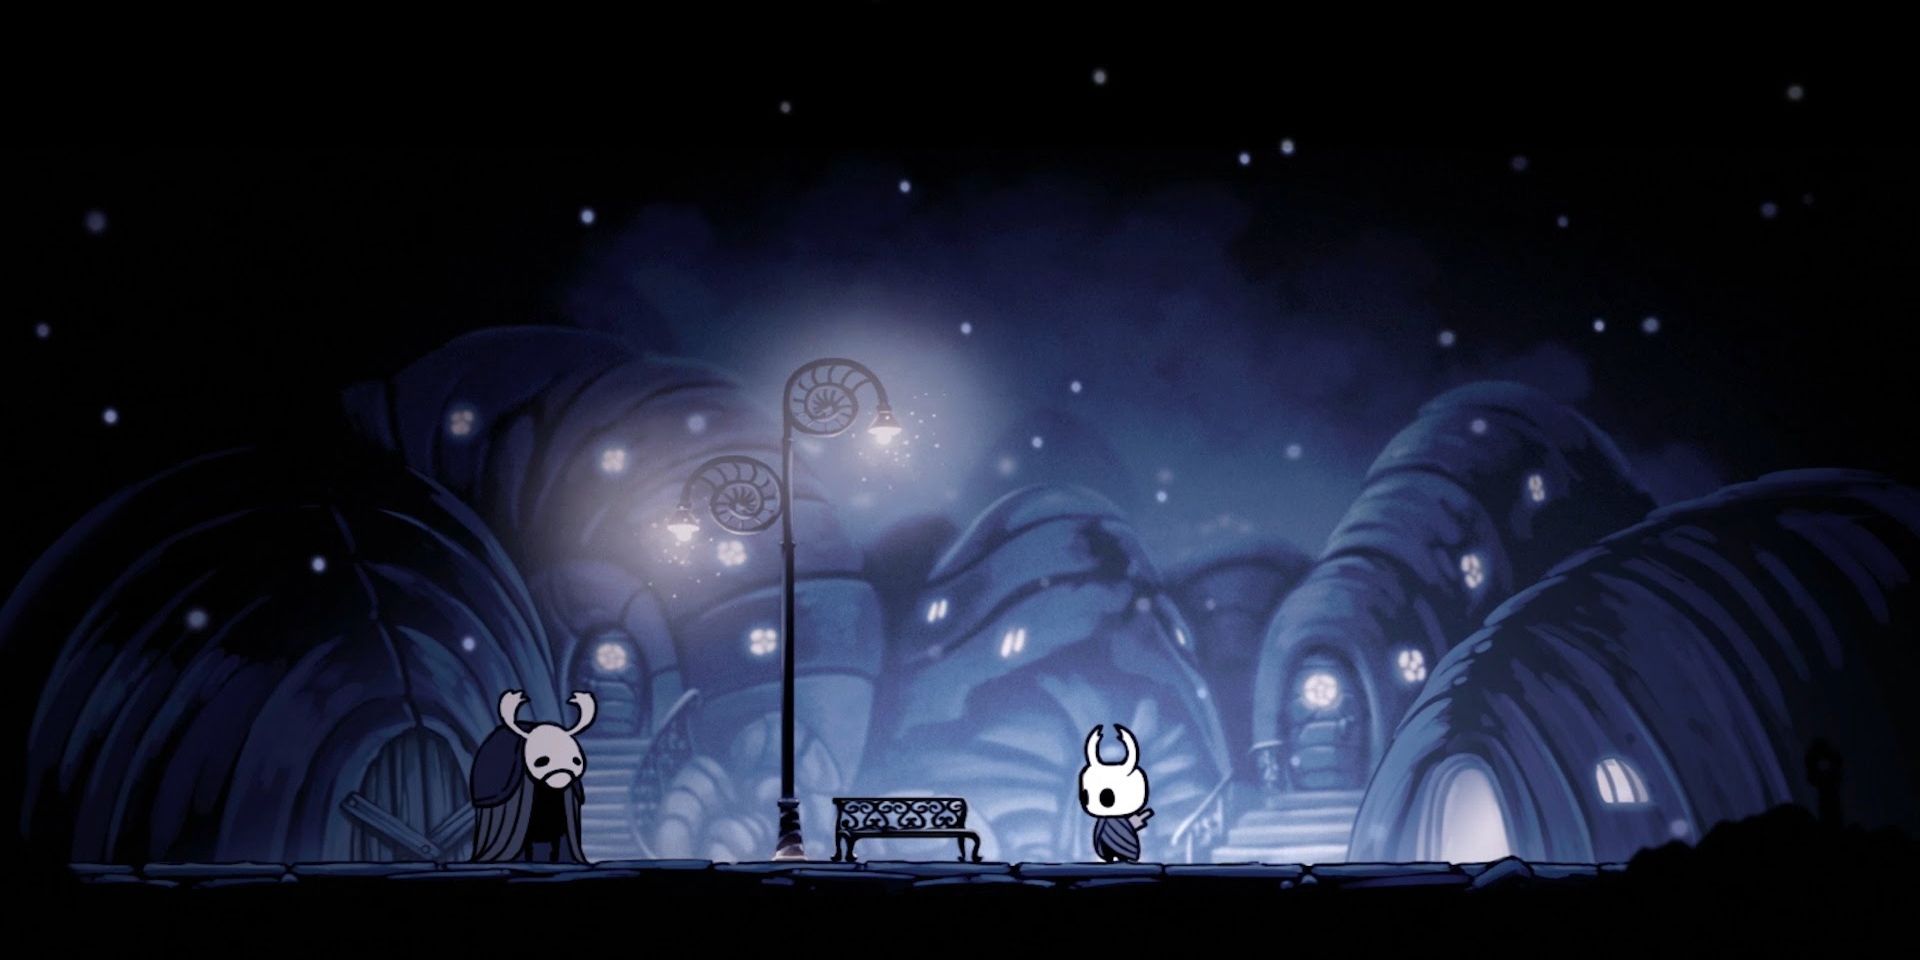 Two figures stand next to a lamp pose in a dark street in Hollow Knight.